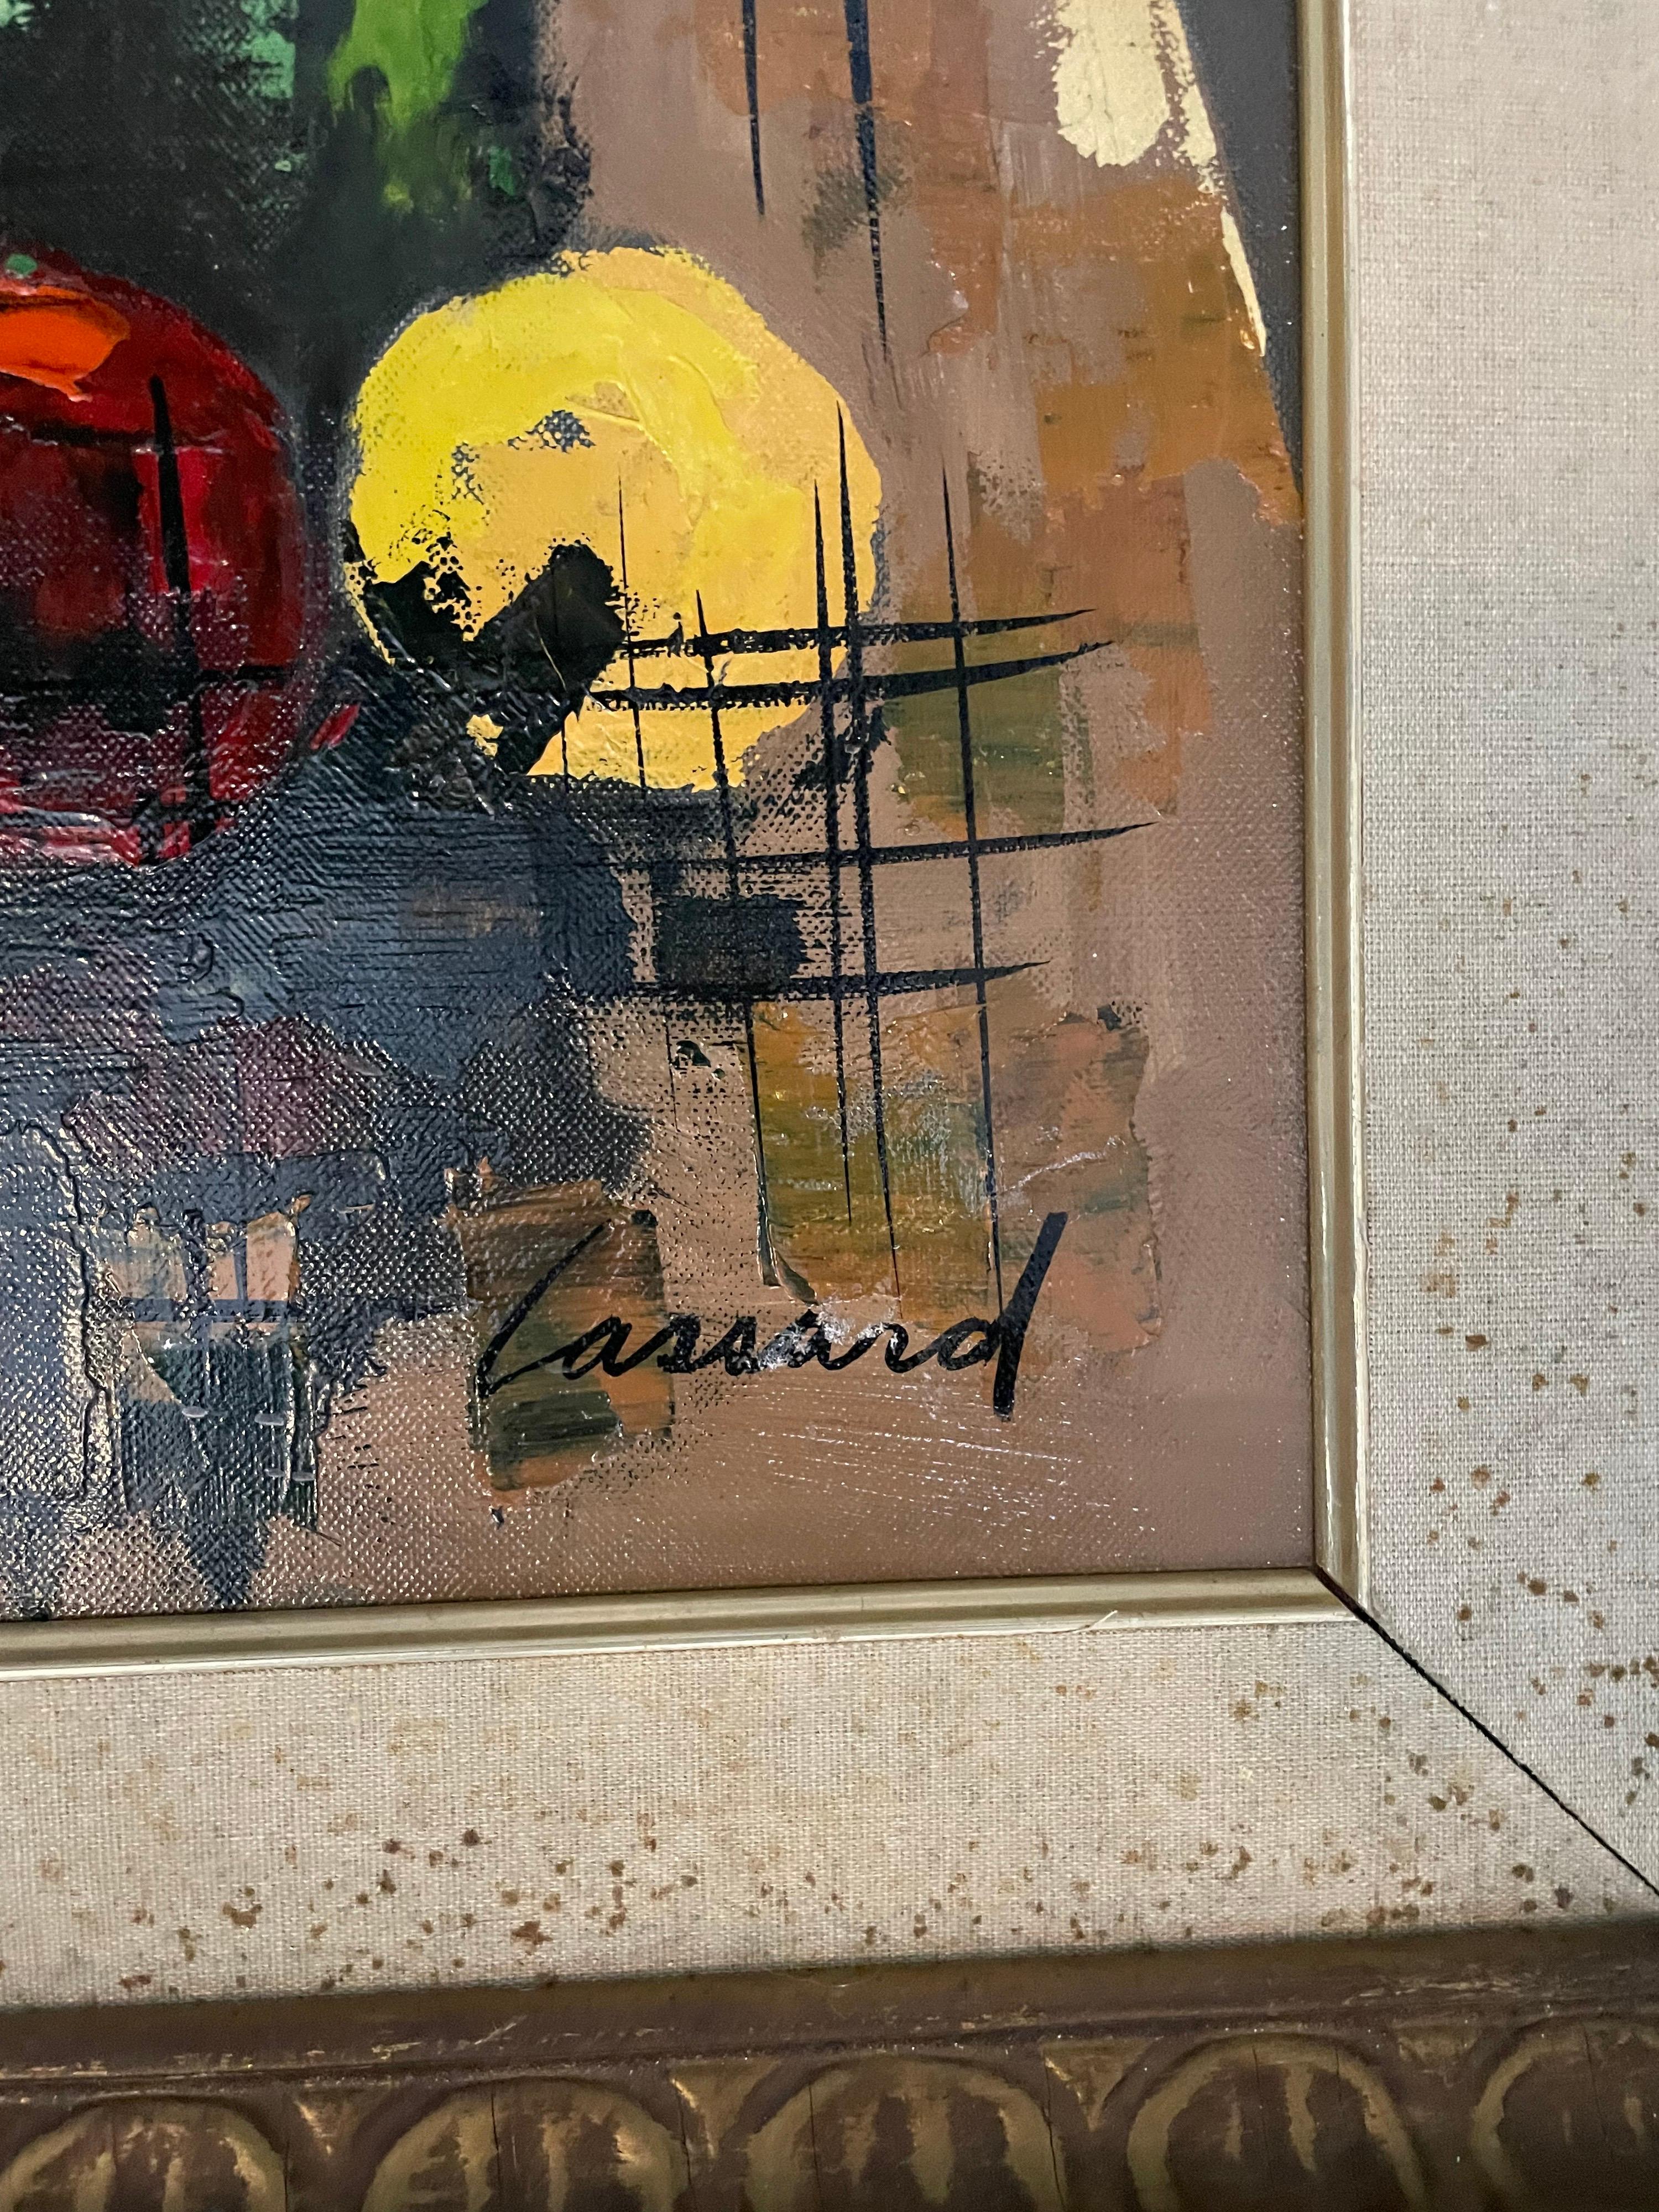 Original Mid-Century Modern still life painting. Signed by the artist Cassard. Oil paint on canvas, encased in an antique wooden frame with beautiful detail and fabric matting.